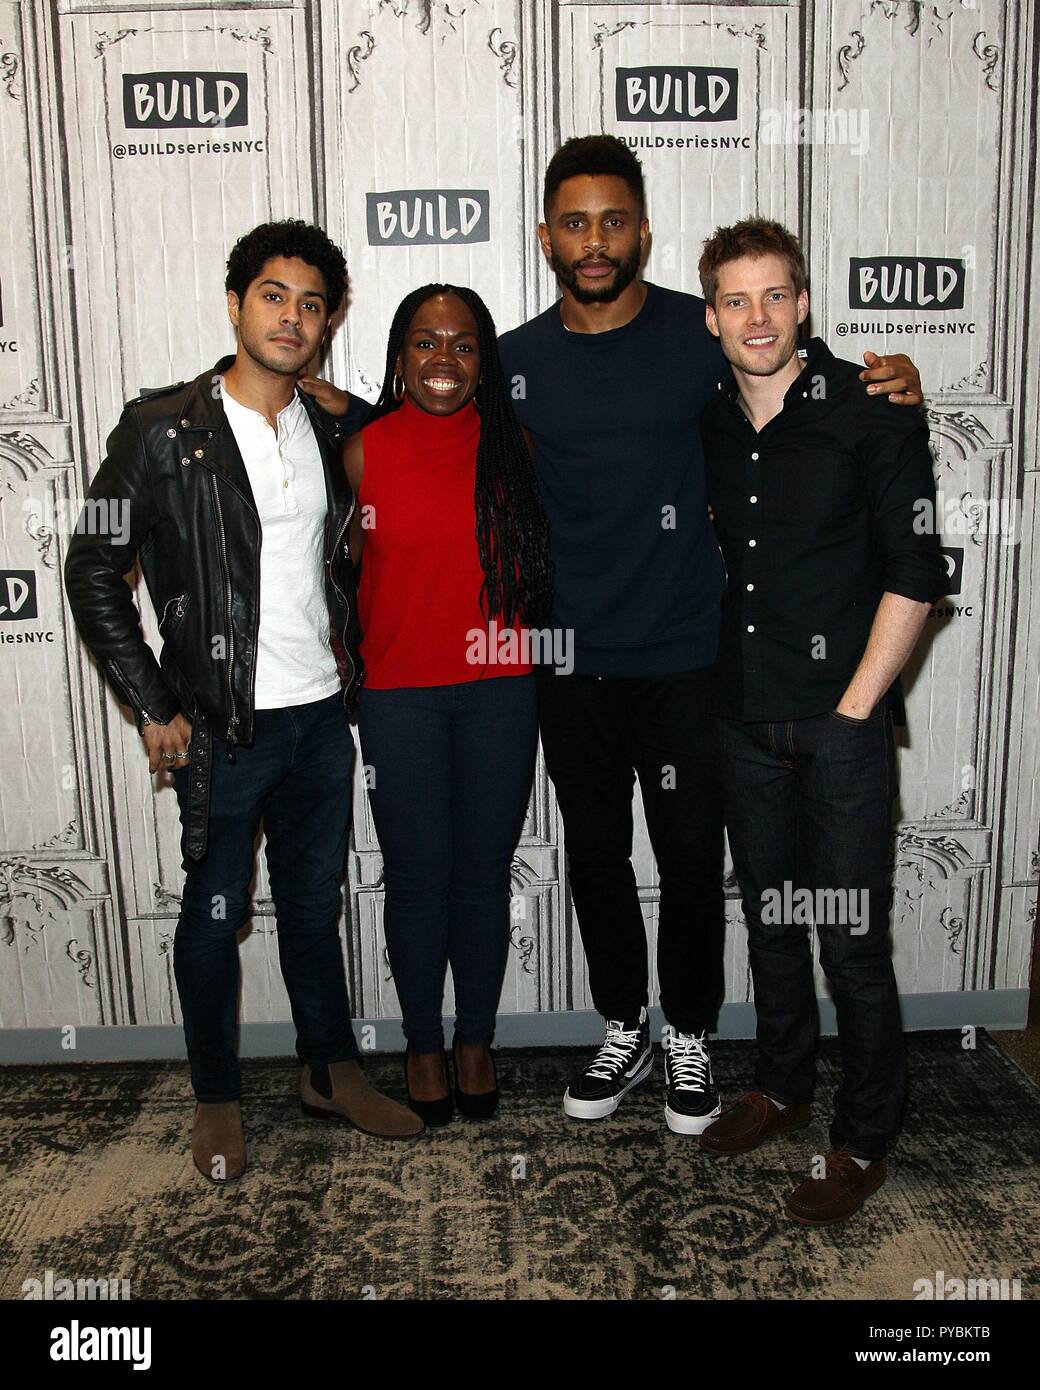 New York, NY, USA. 26th Oct, 2018. Ian Quinlan, Ngozi Anyanwu, Nnamdi Asomugha, Hunter Parrish out and about for AOL Build Series Celebrity Candids - FRI, AOL Build Series, New York, NY October 26, 2018. Credit: Steve Mack/Everett Collection/Alamy Live News Stock Photo